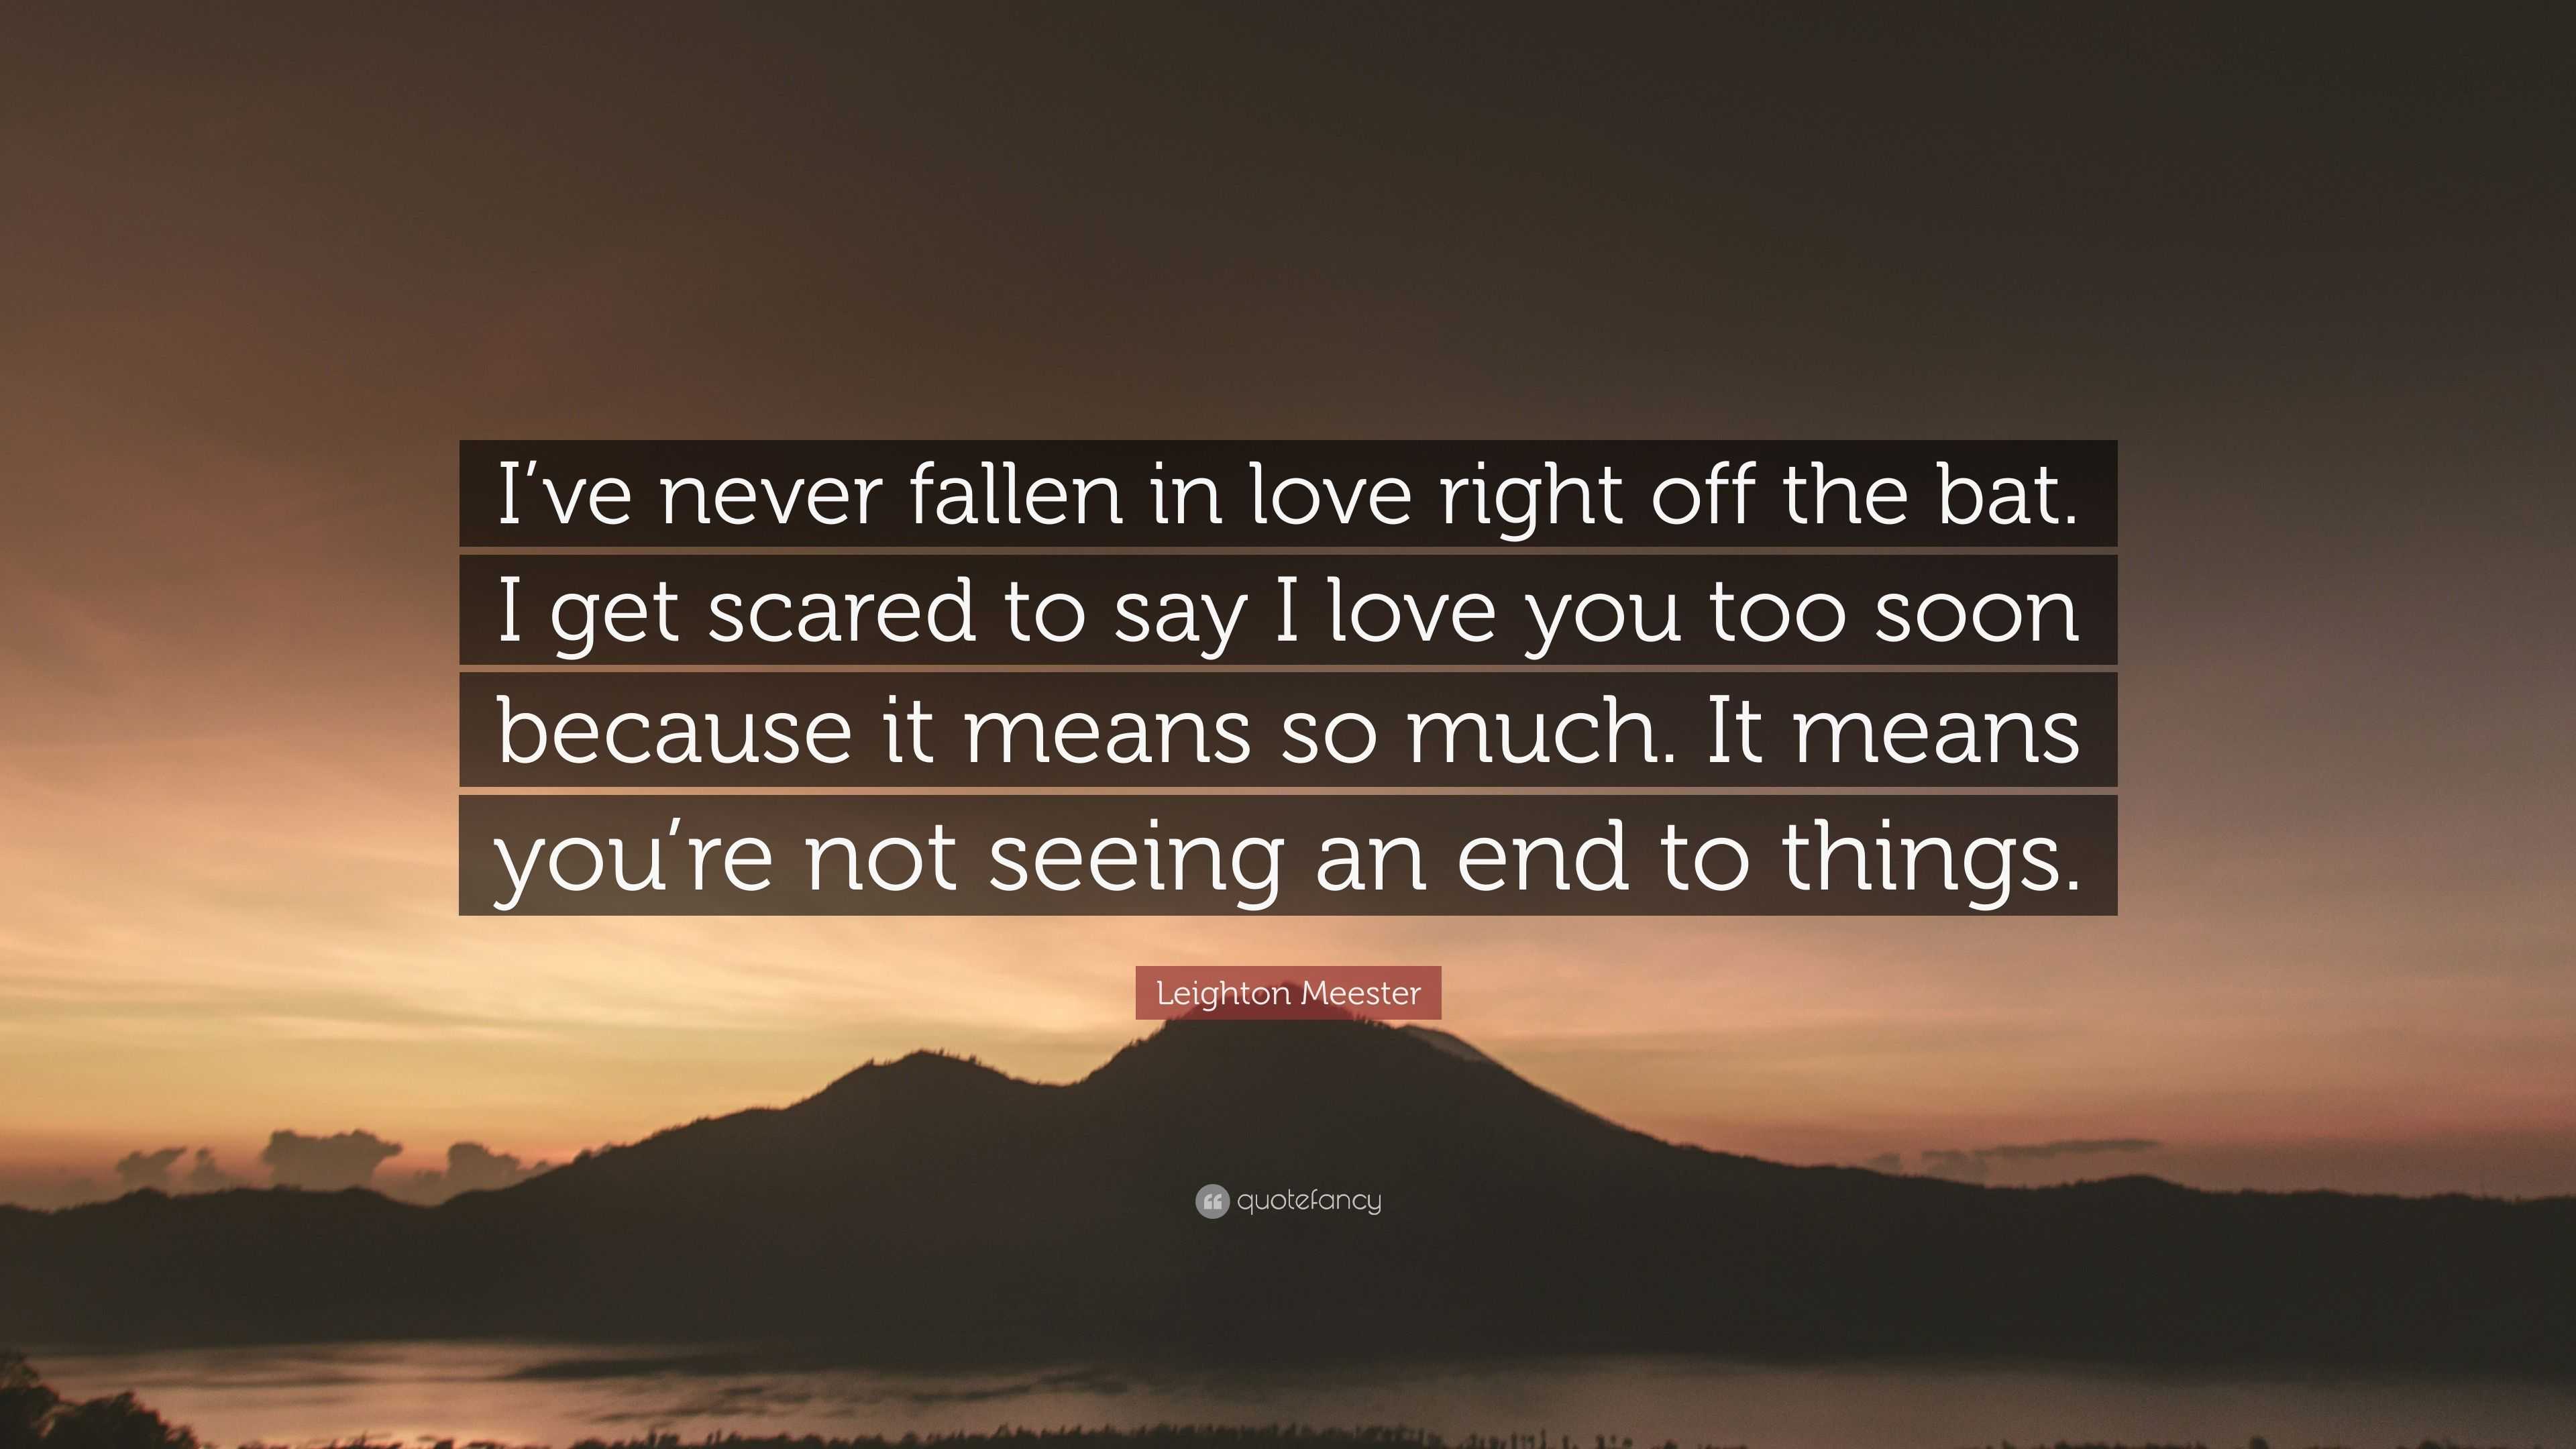 Leighton Meester Quote “I ve never fallen in love right off the bat